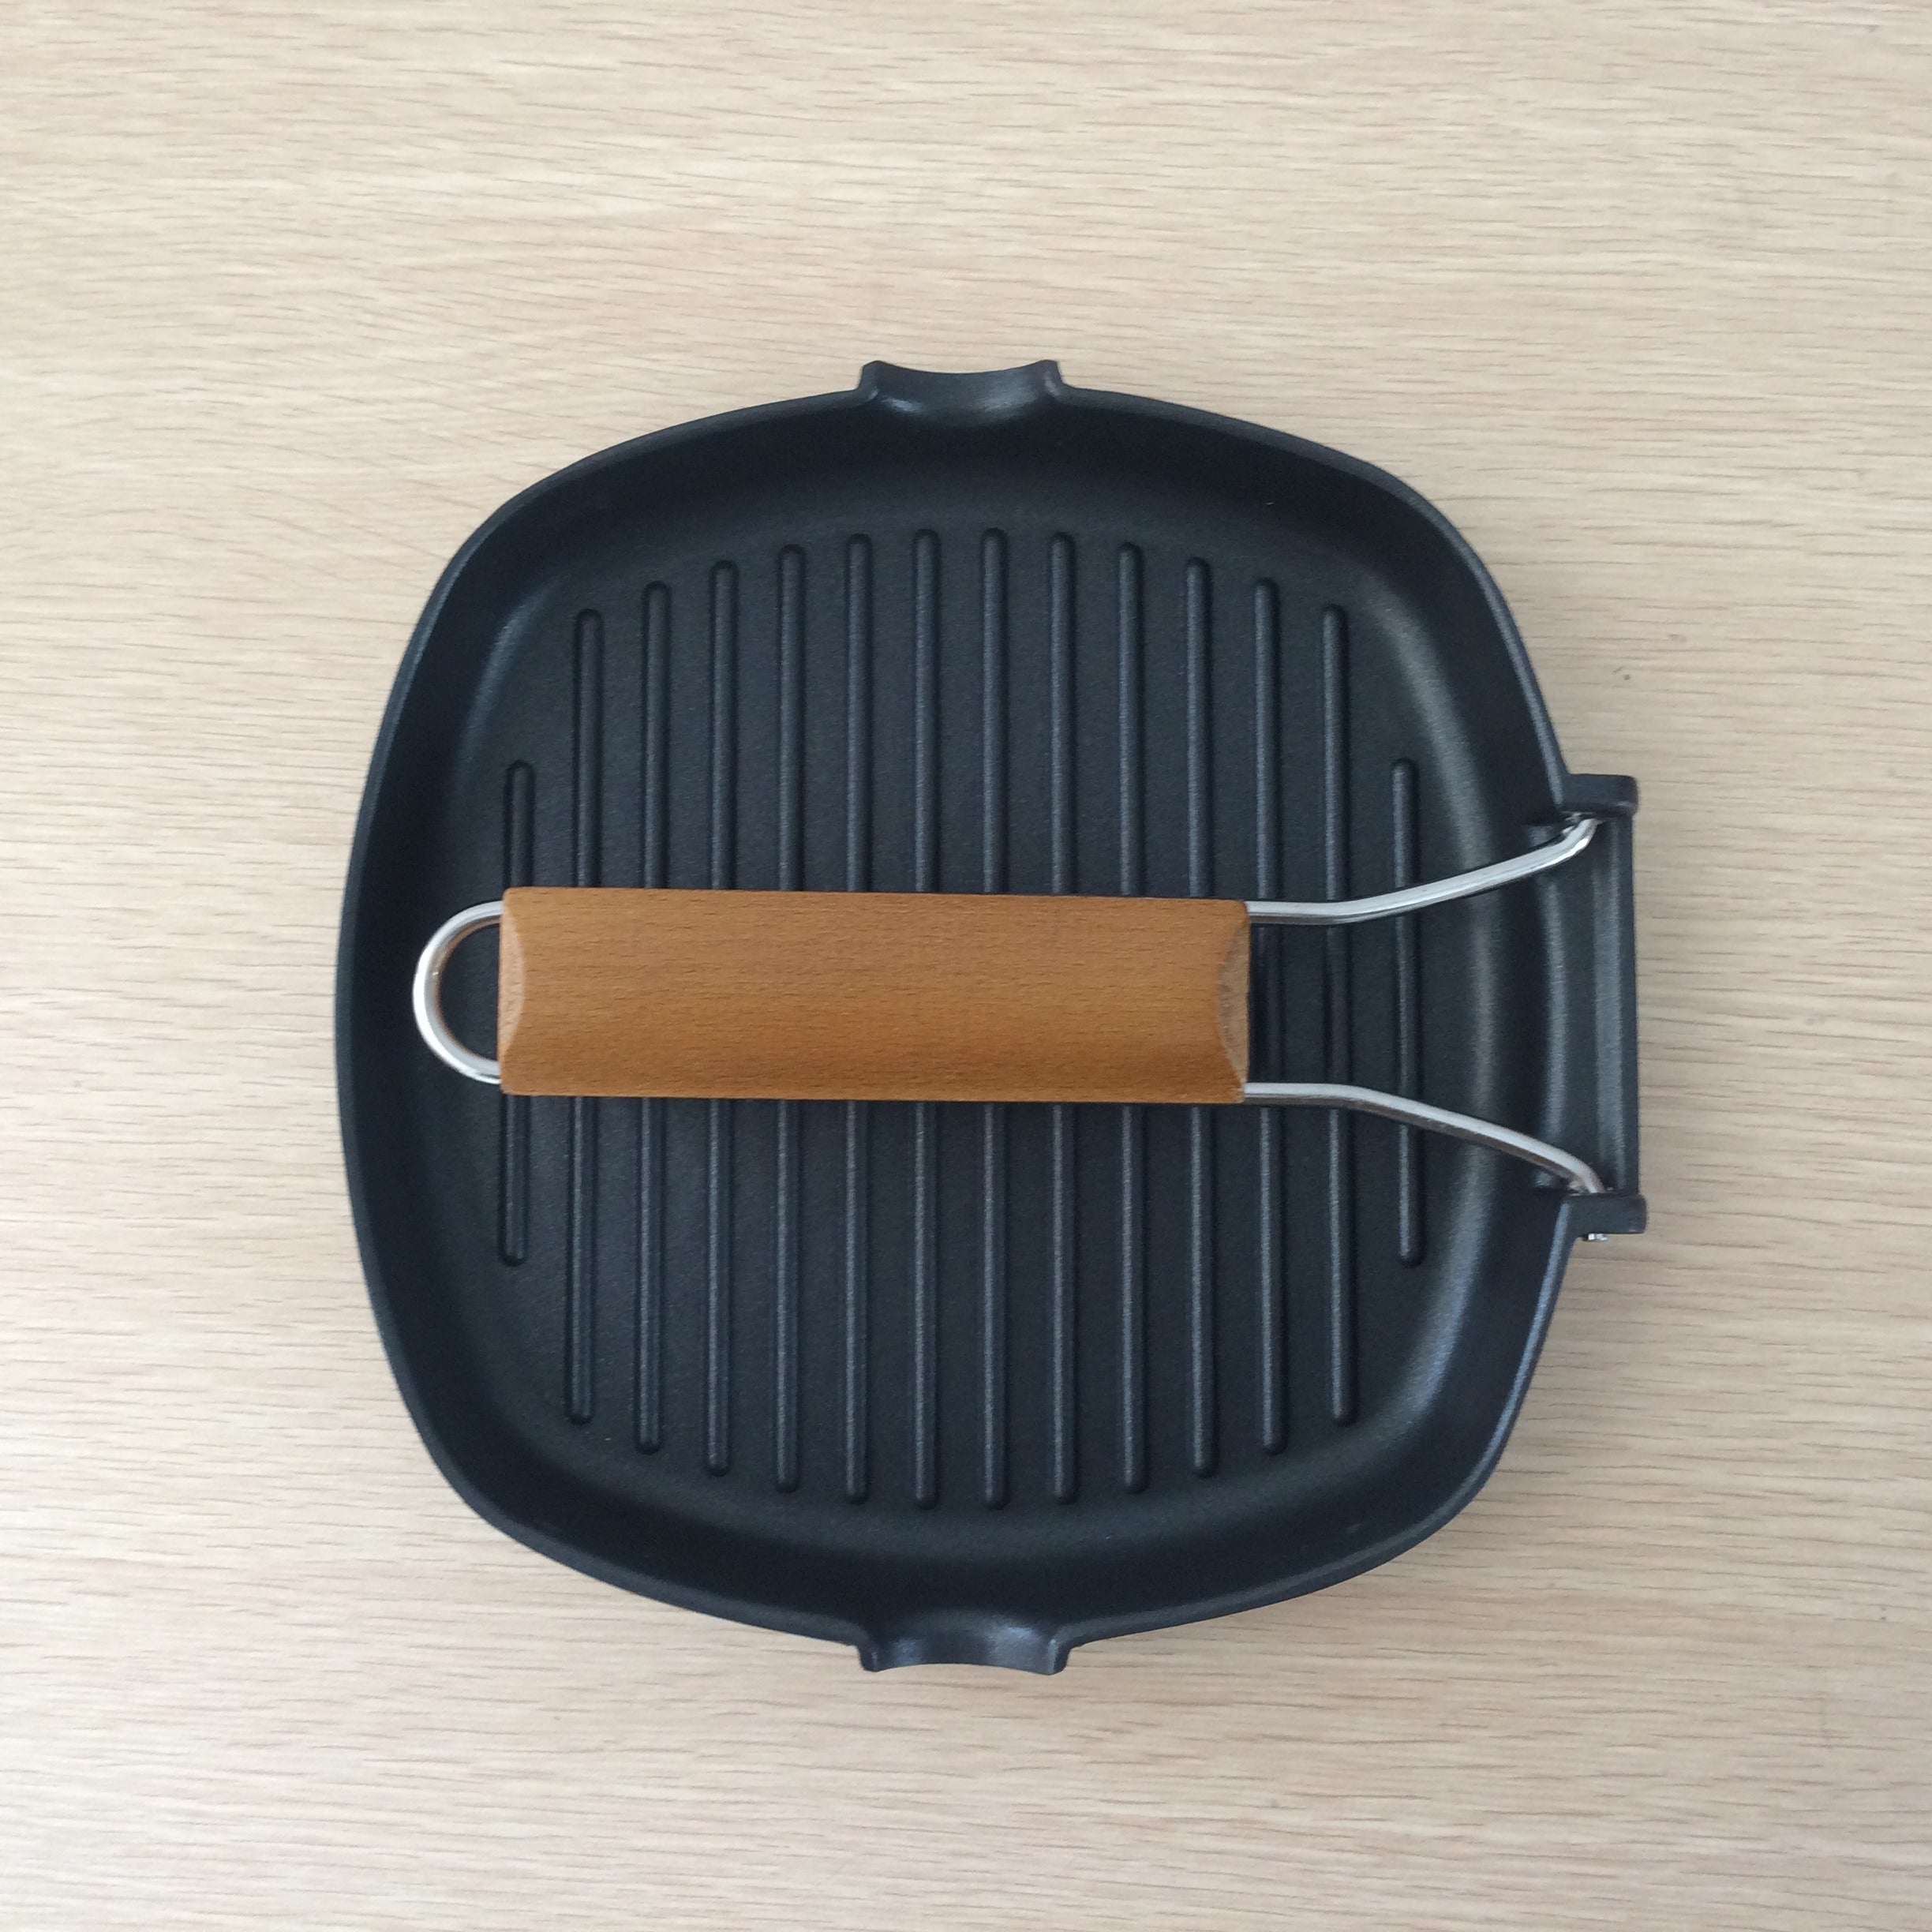 THE TRAVELER CORNER™ Gourmet Foldable Non-Sticky Grill Pan